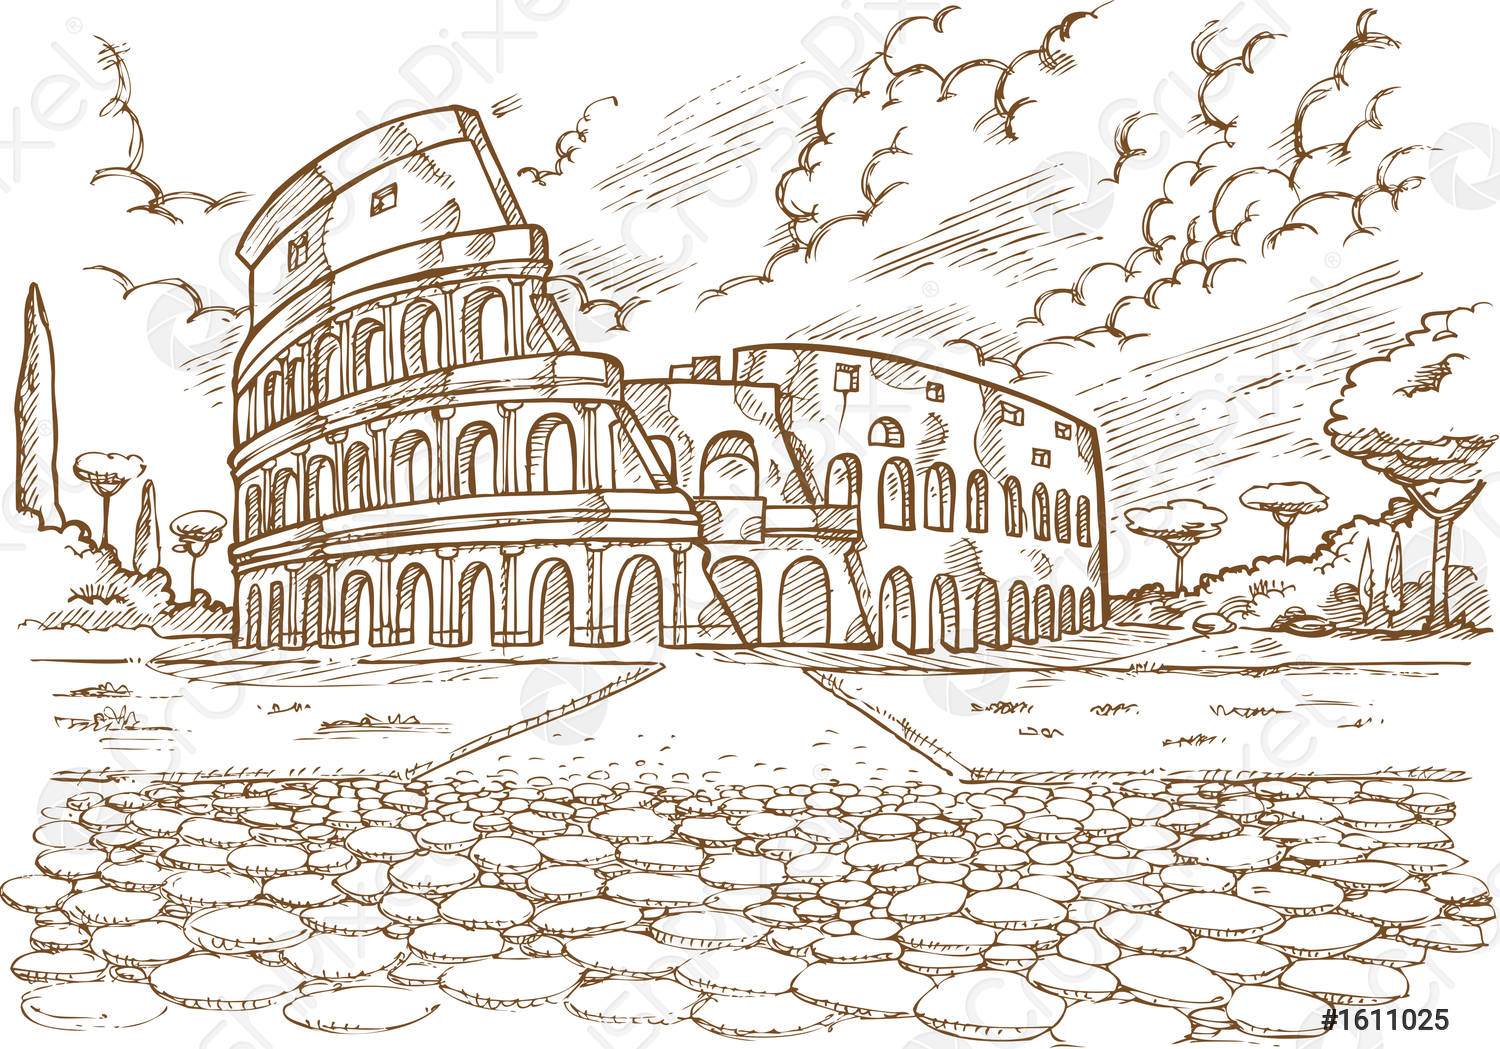 Colosseum Drawing Sketch